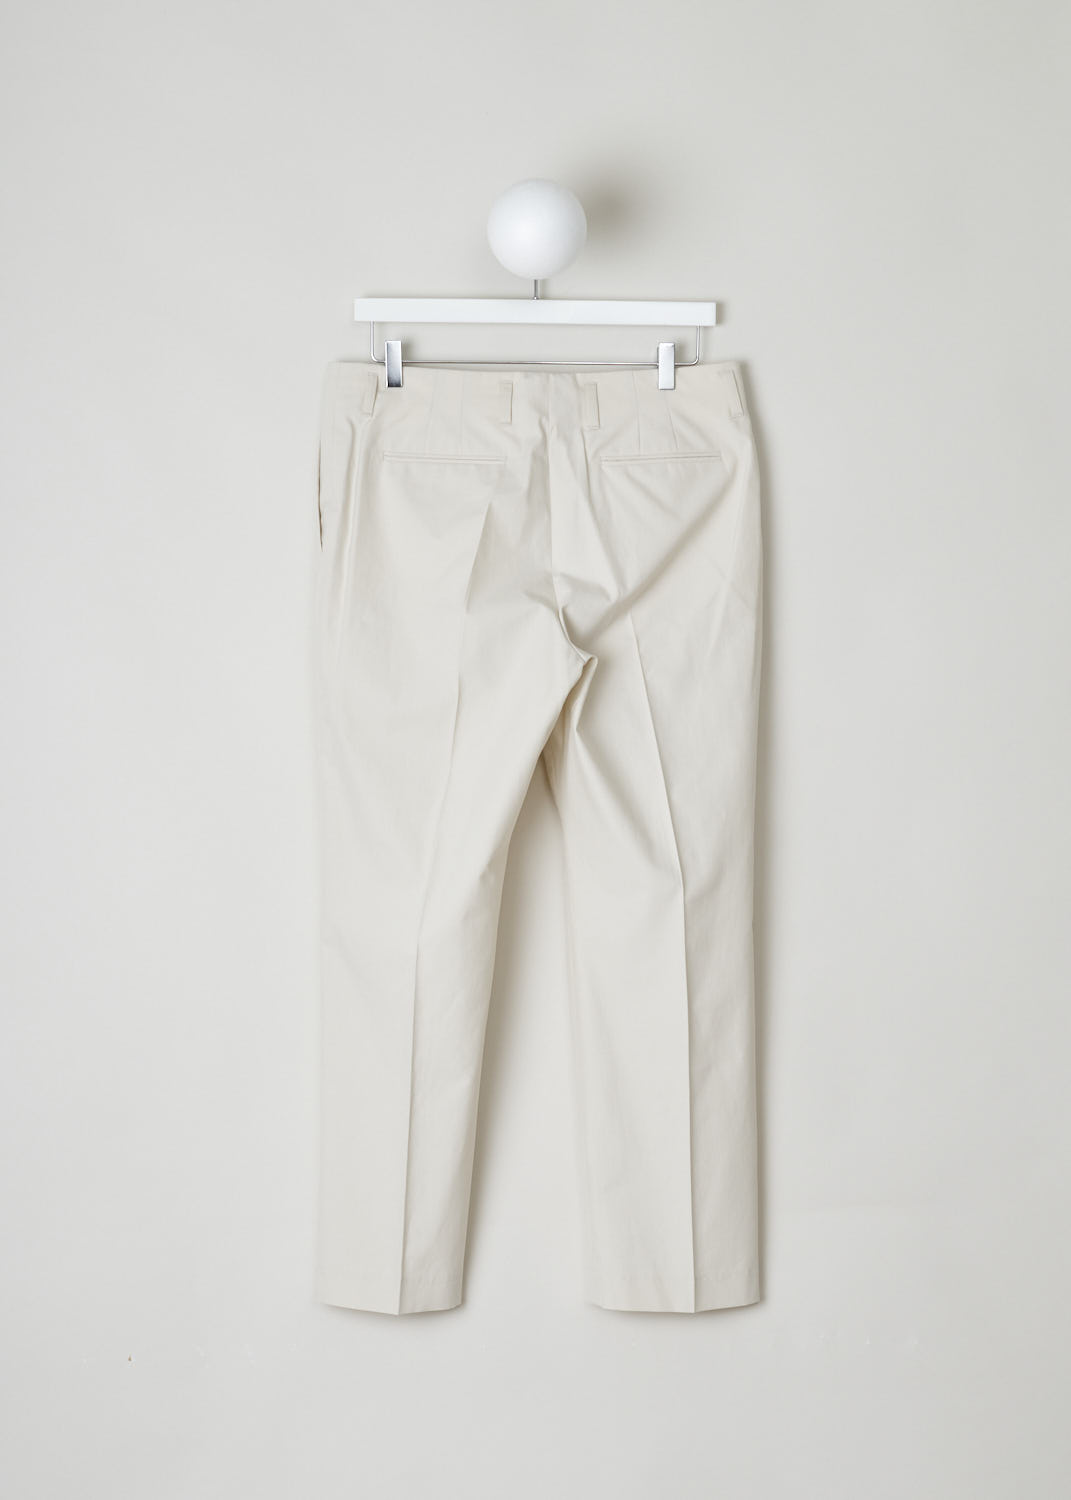 DRIES VAN NOTEN,ECRU PANTS WITH FRONT PLEATS, PAOLA_9022_WW_PANTS_ECR, Beige Back, These ecru trousers don's have an obvious waistband. Across the waist, belt loops can be found. It comes with a zip and clasp closure. Additionally these trousers have two side slit pockets in the front and two welt pockets in the back. 
